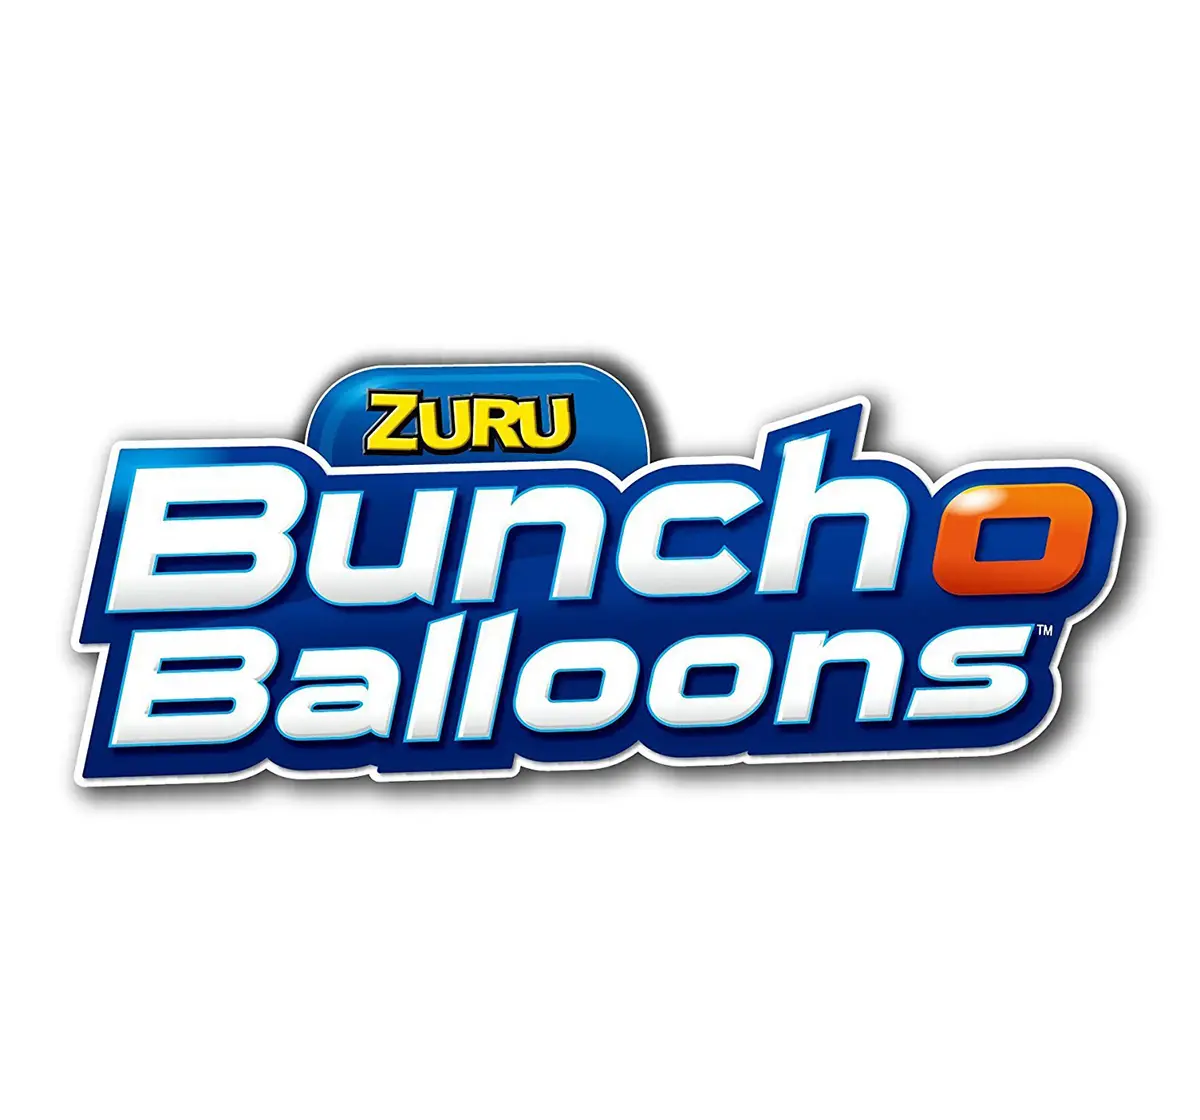 Zuru Bunch O Balloons Party Supplies for Kids age 3Y+ (Colors Vary)